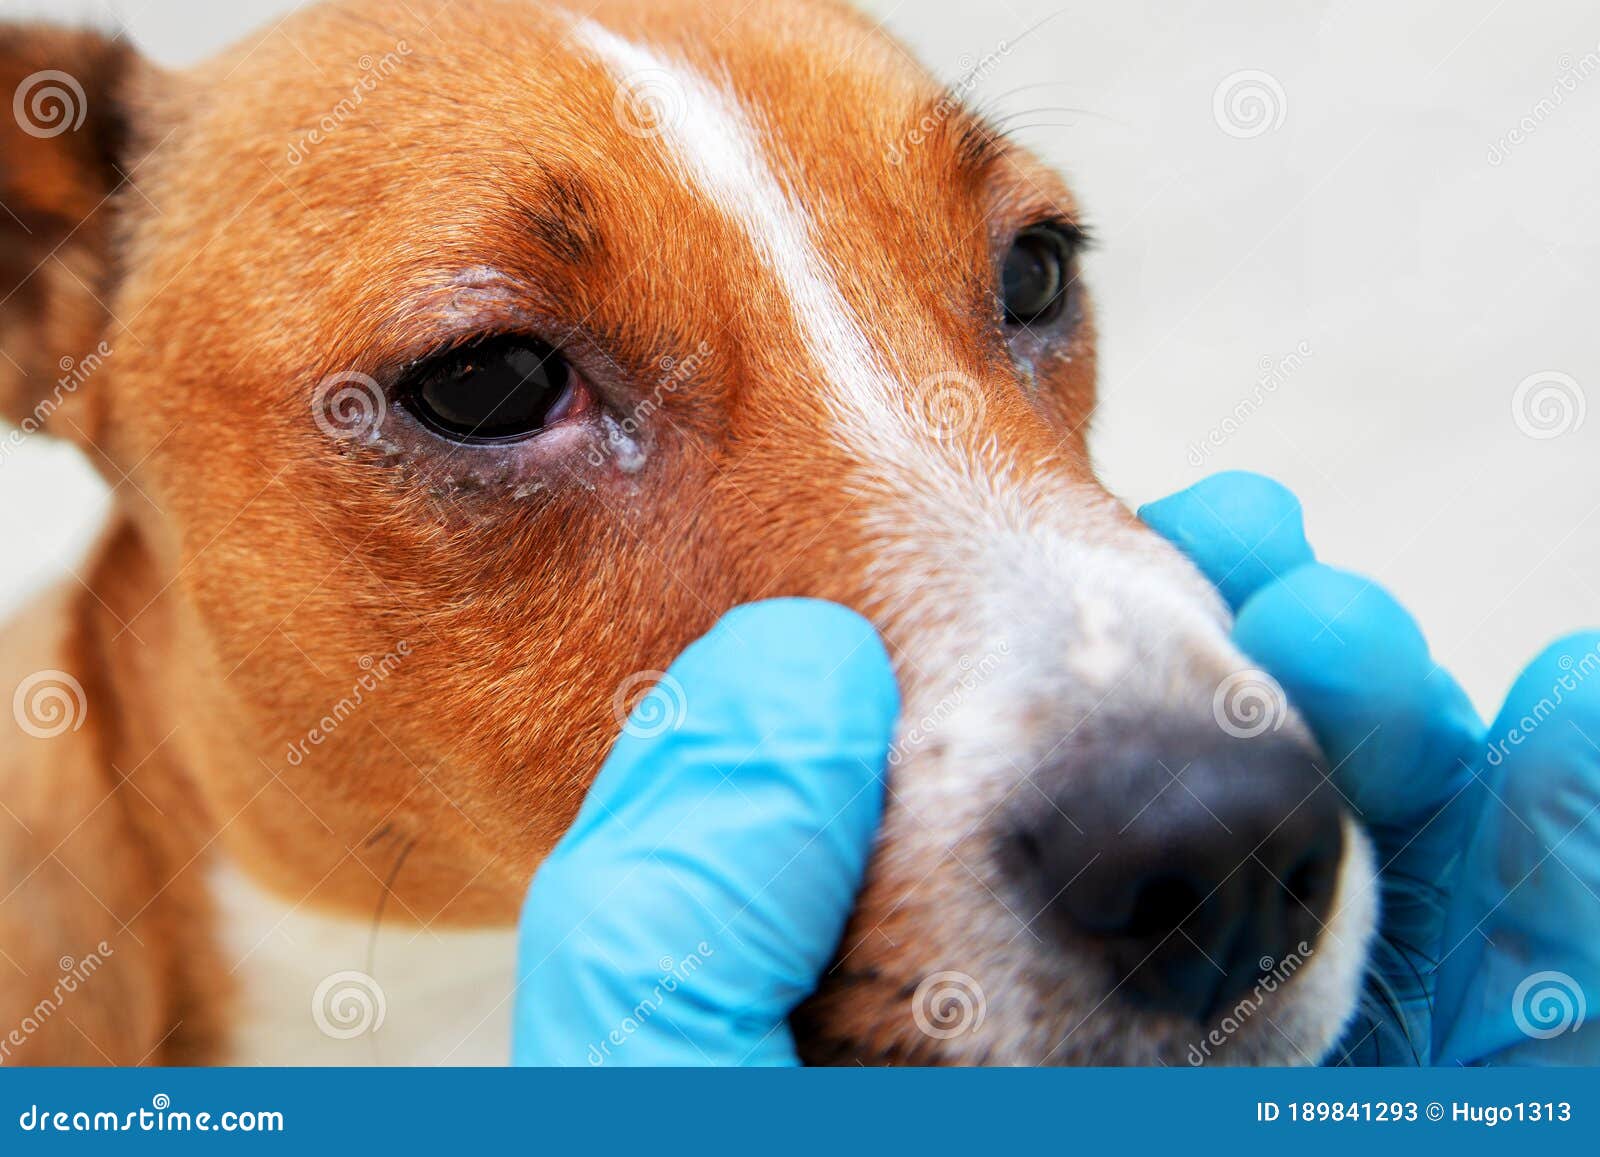 Sick Dog with Infected Crusty Eyes Examination. Inspection, Blepharitis. Close of Redness and Bump in the Eye a Stock Image - Image of iris, doctor: